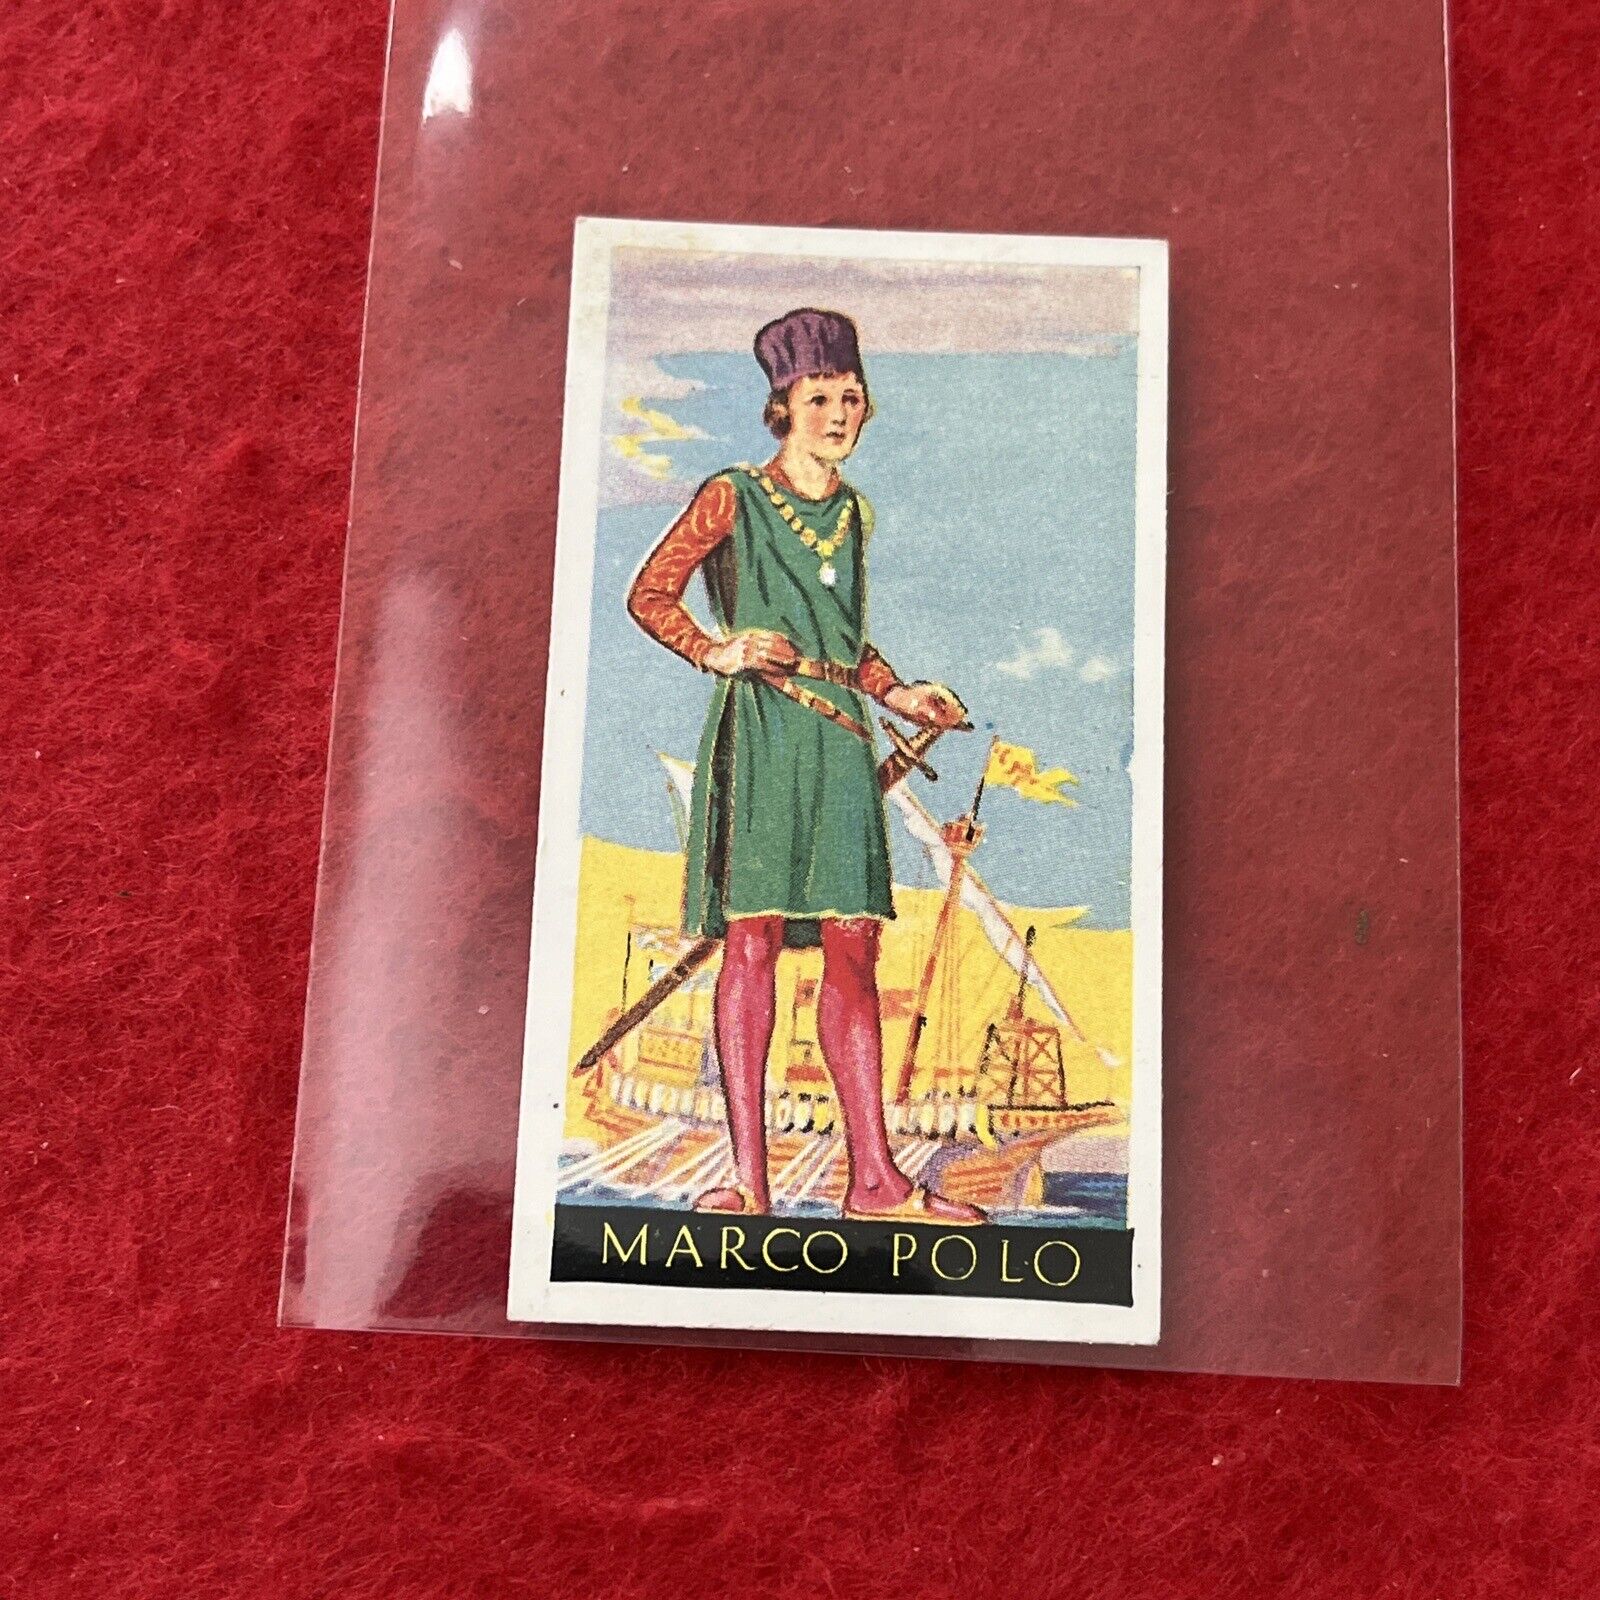 1936 Godfrey Phillips “Famous Minors” MARCO POLO Tobacco Card #6 EX-NM Condition